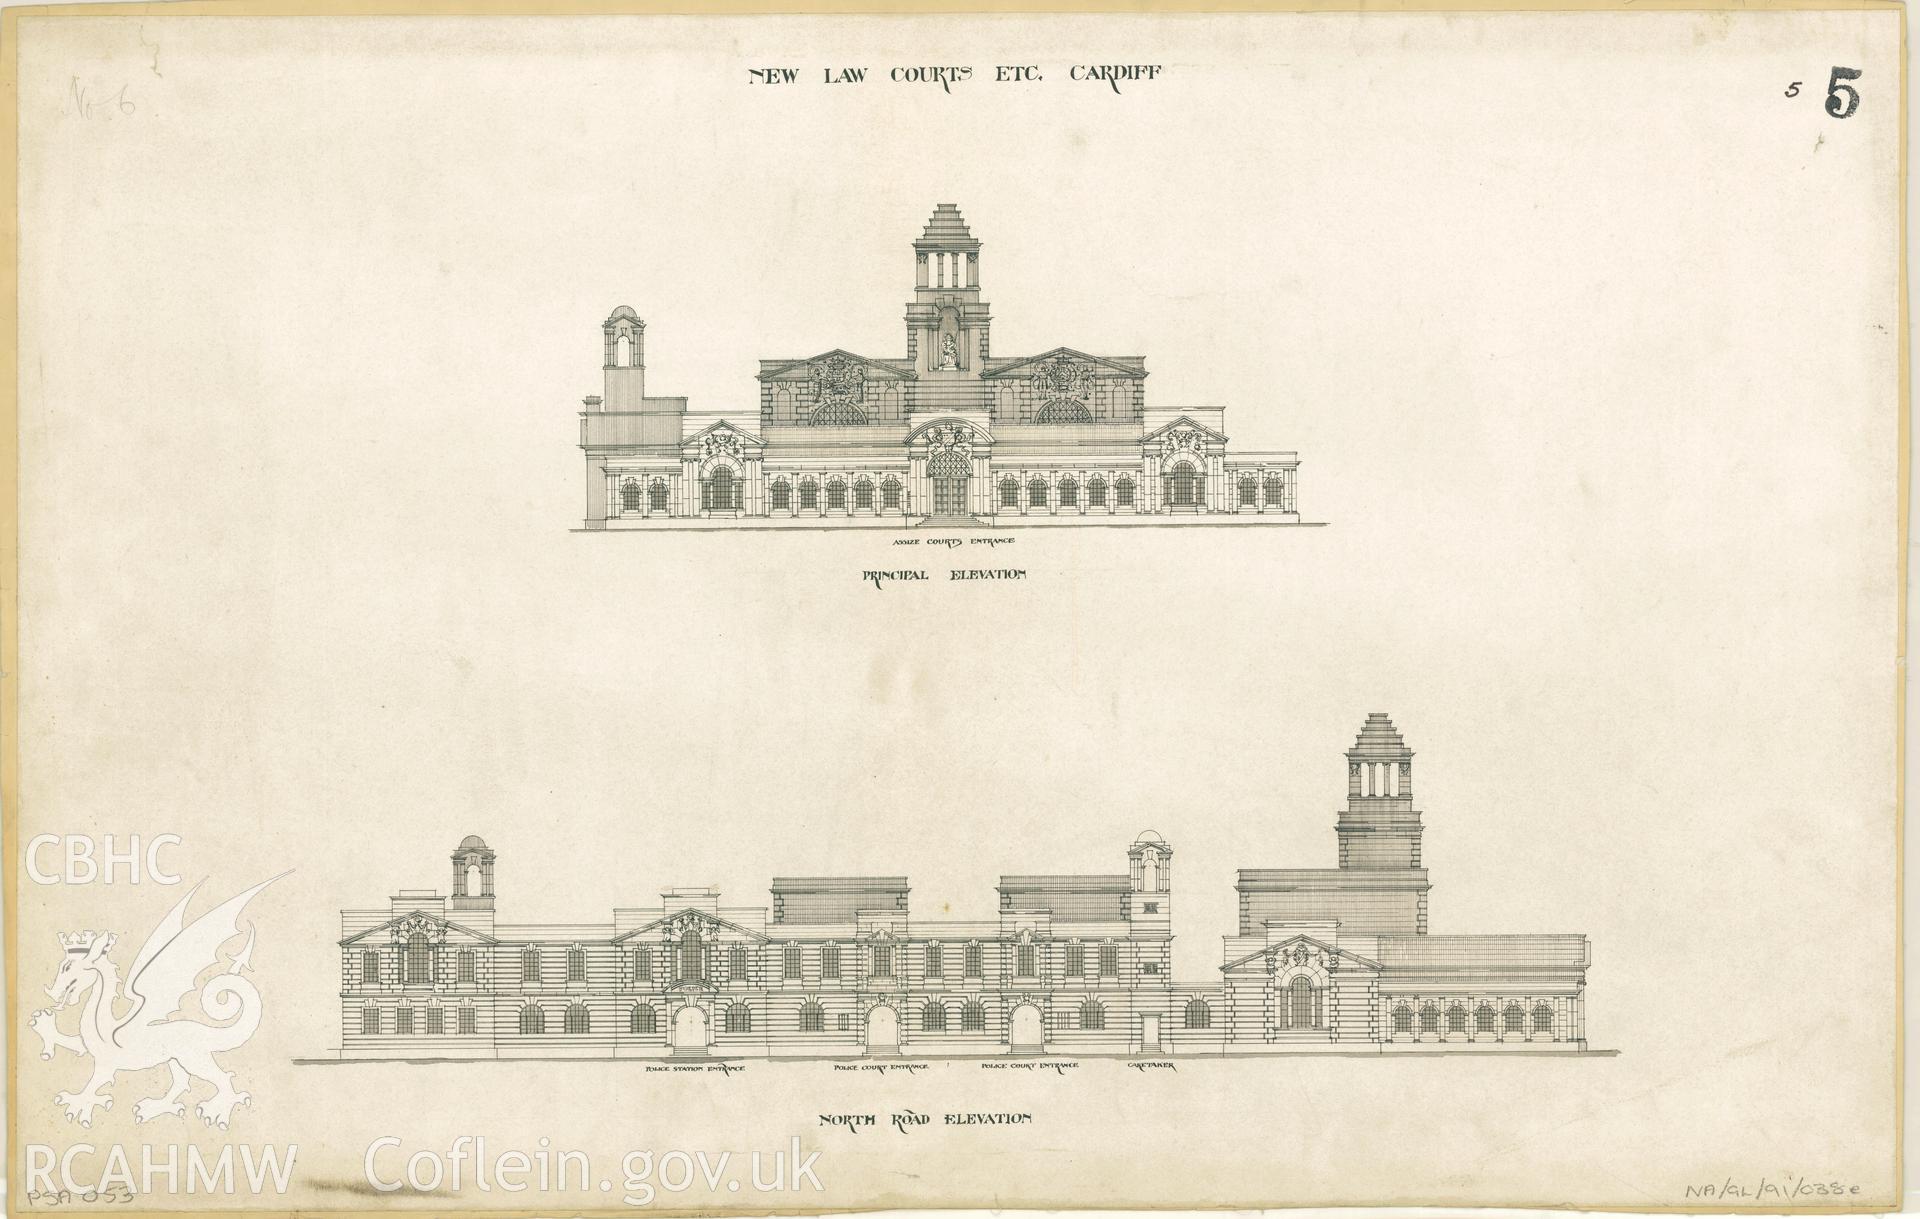 Law Court, Cathays Park, Cardiff; measured drawing showing proposed elevation views, submitted as  an entry in the 1897 competition to produce a design for the new Law Court.